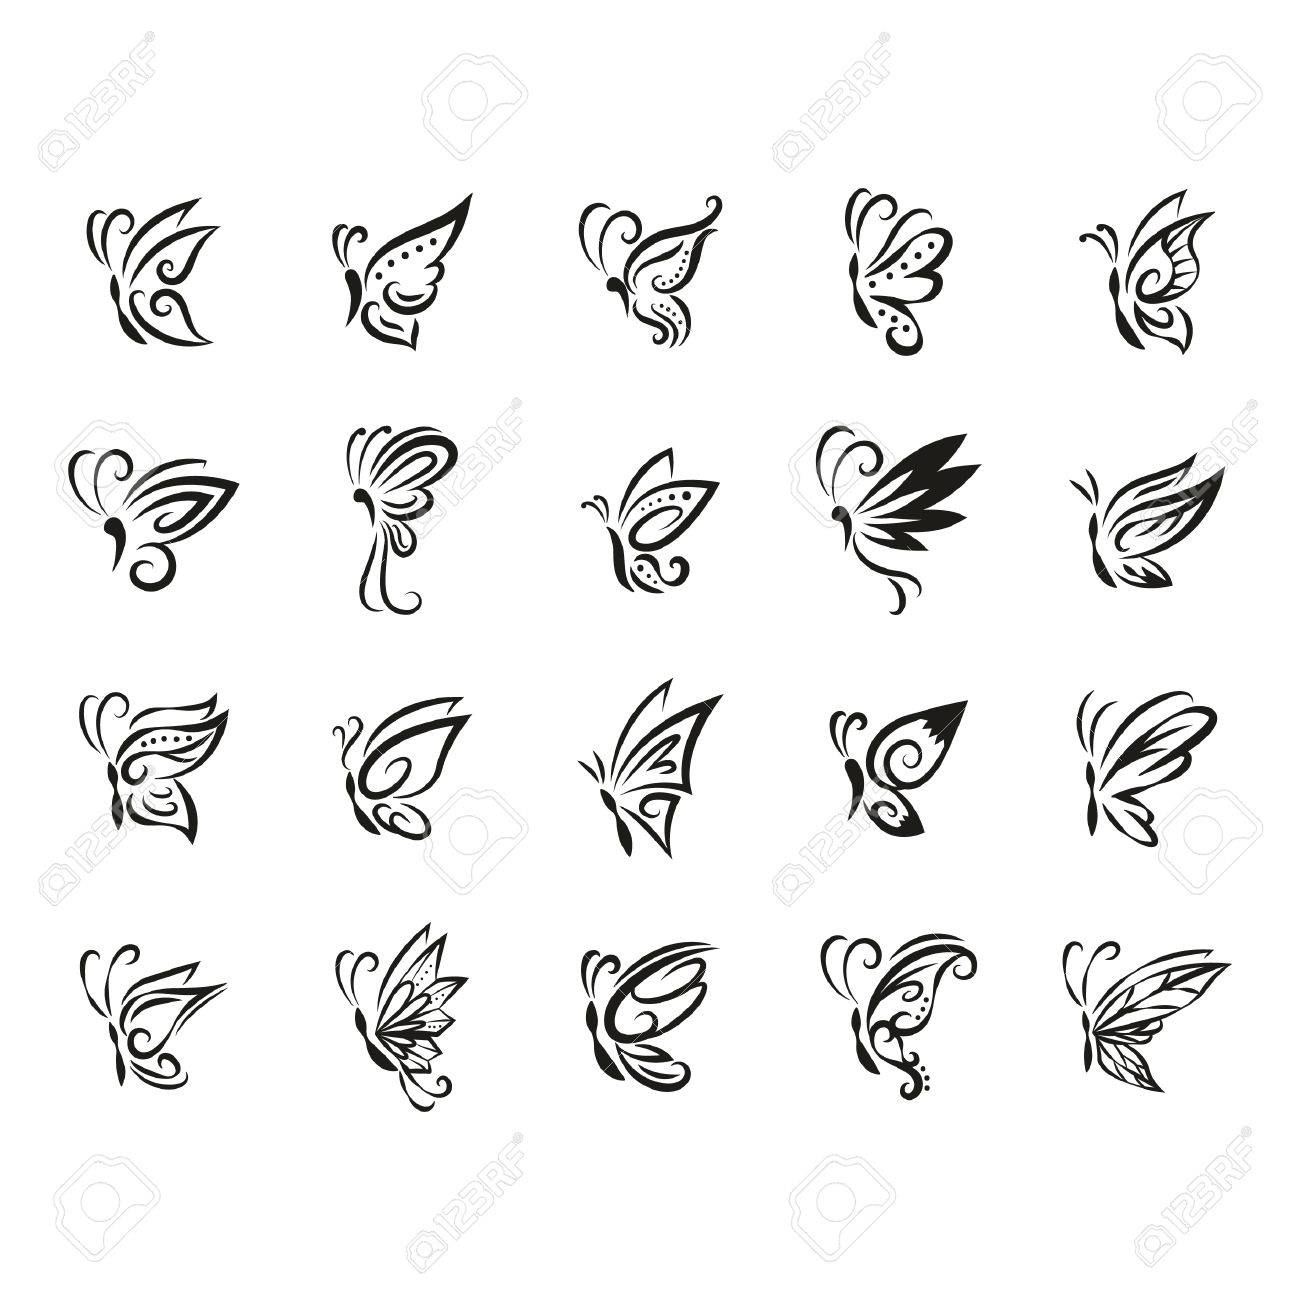 Butterfly Tattoo Set Royalty Free Cliparts Vectors And Stock within sizing 1300 X 1300